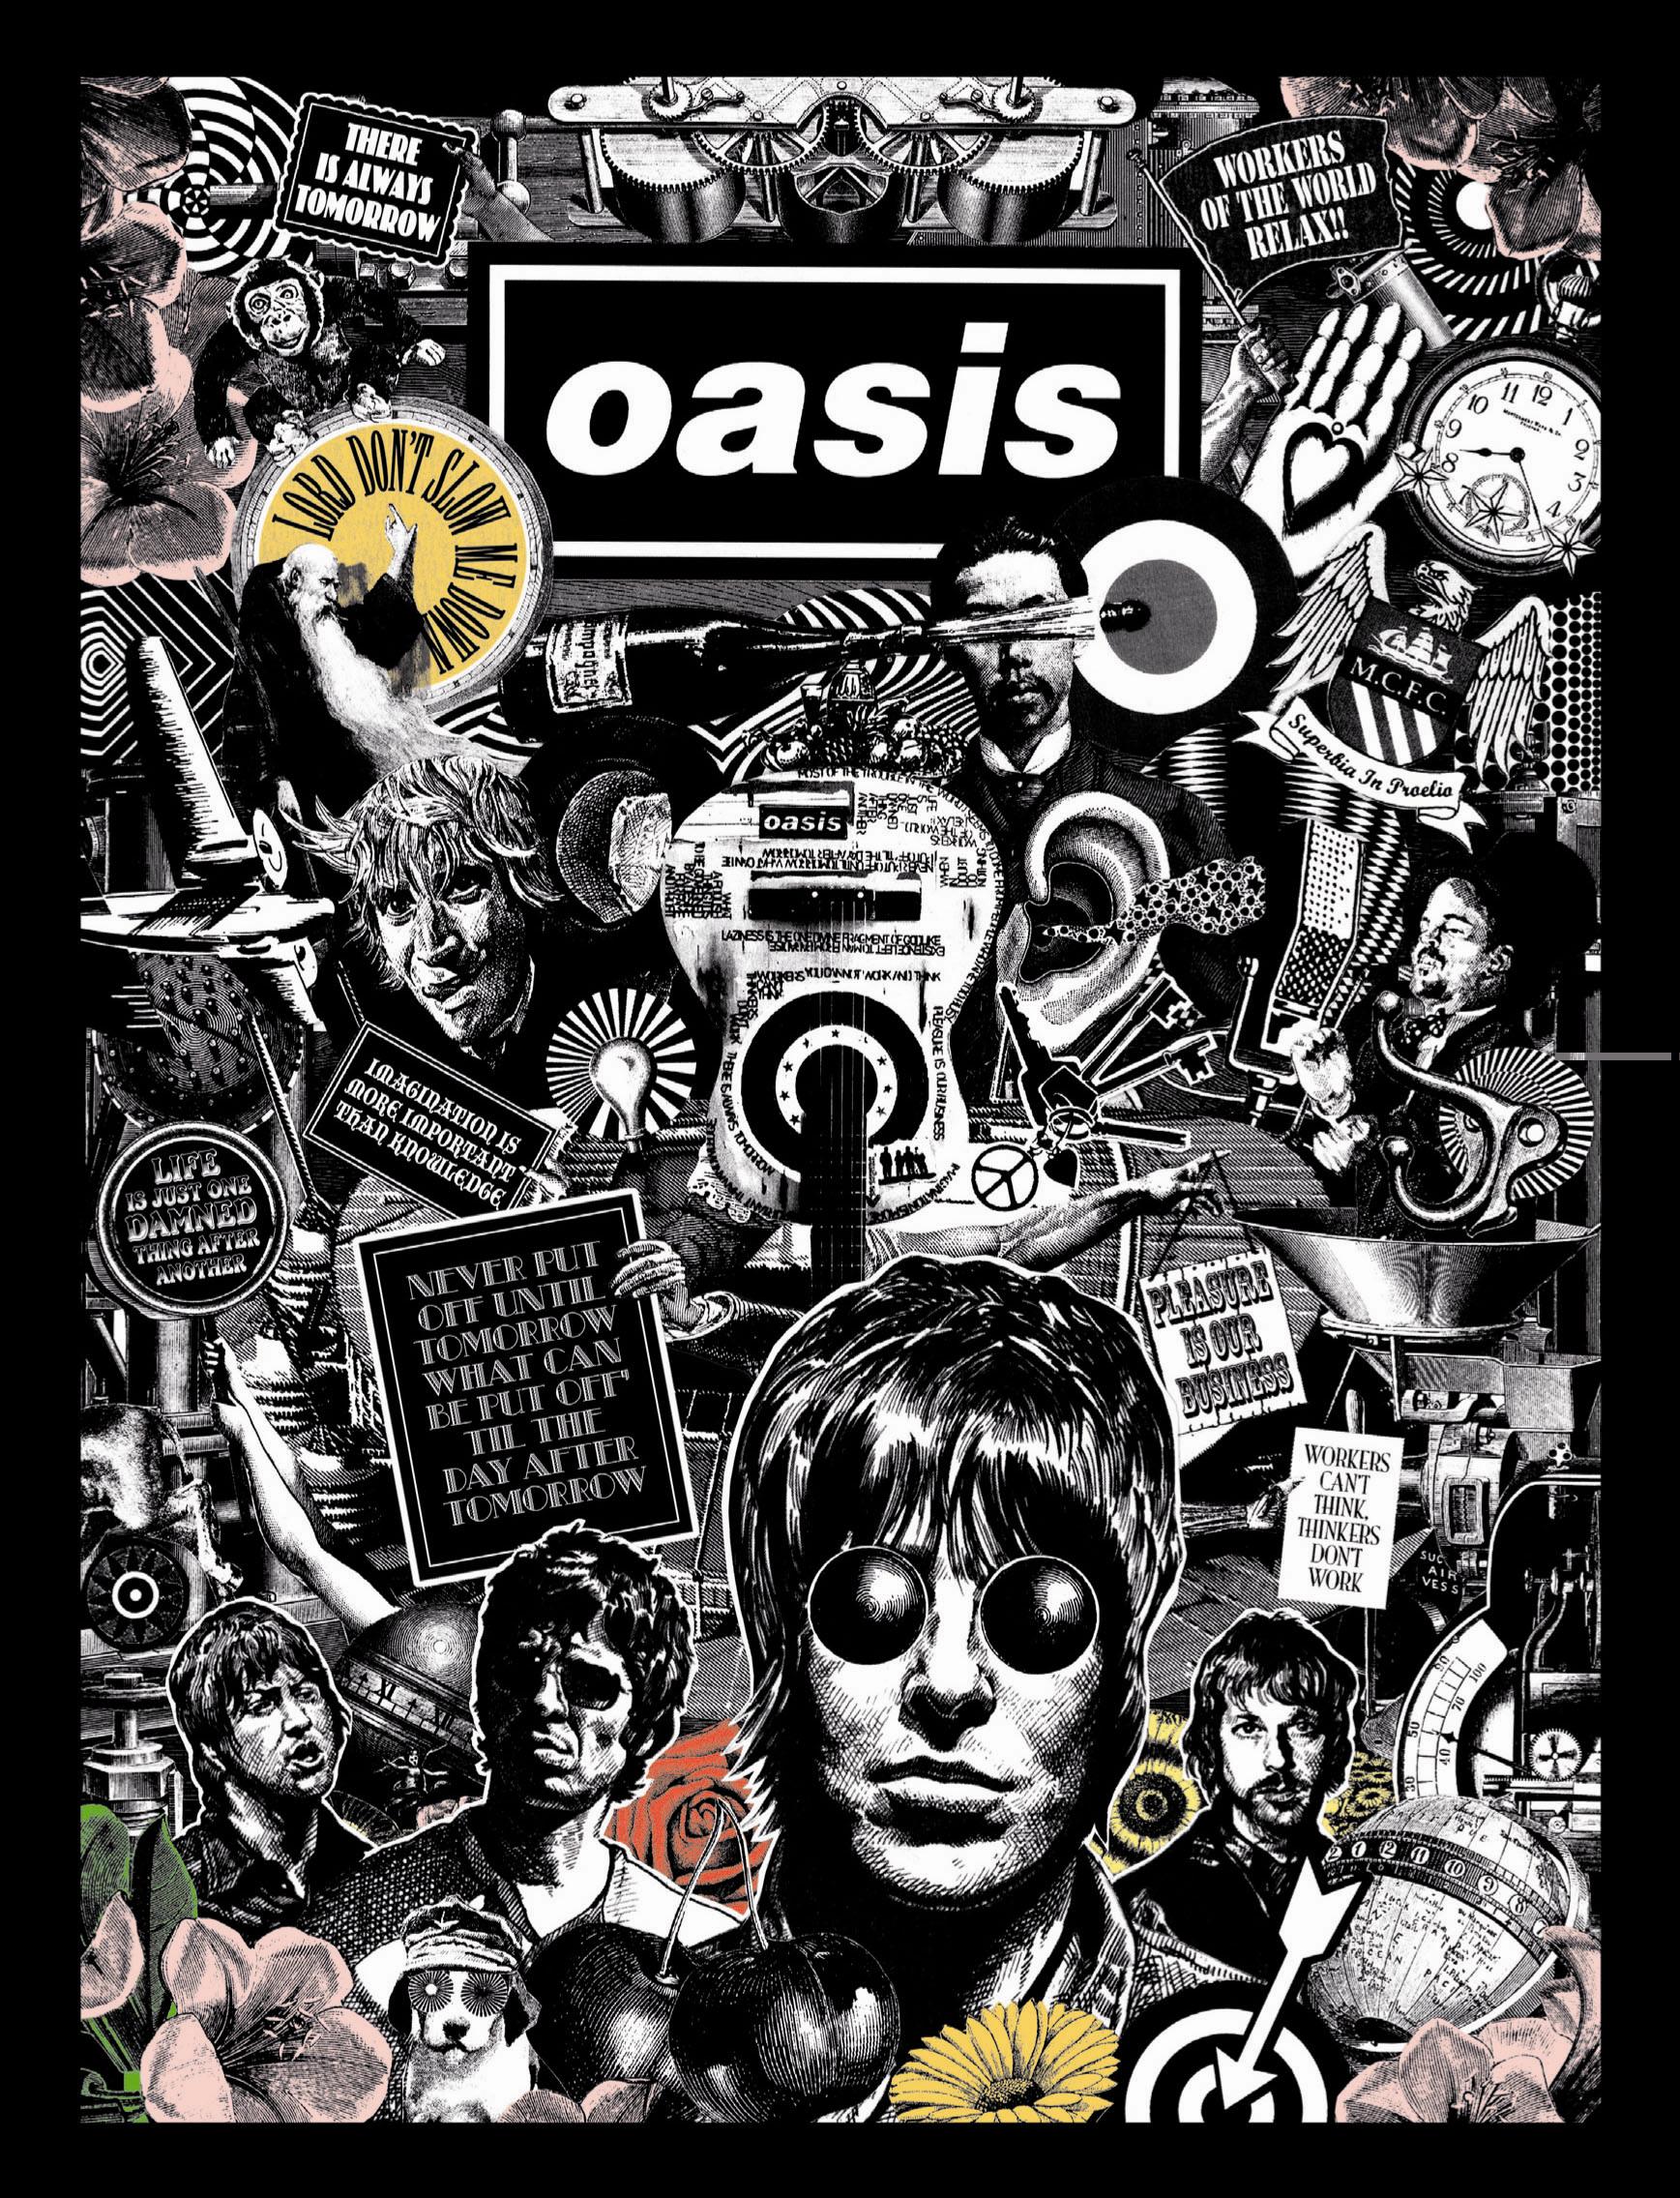 Lord Don T Slow Me Down Dvdリリース Oasis And Nghfb On Blog